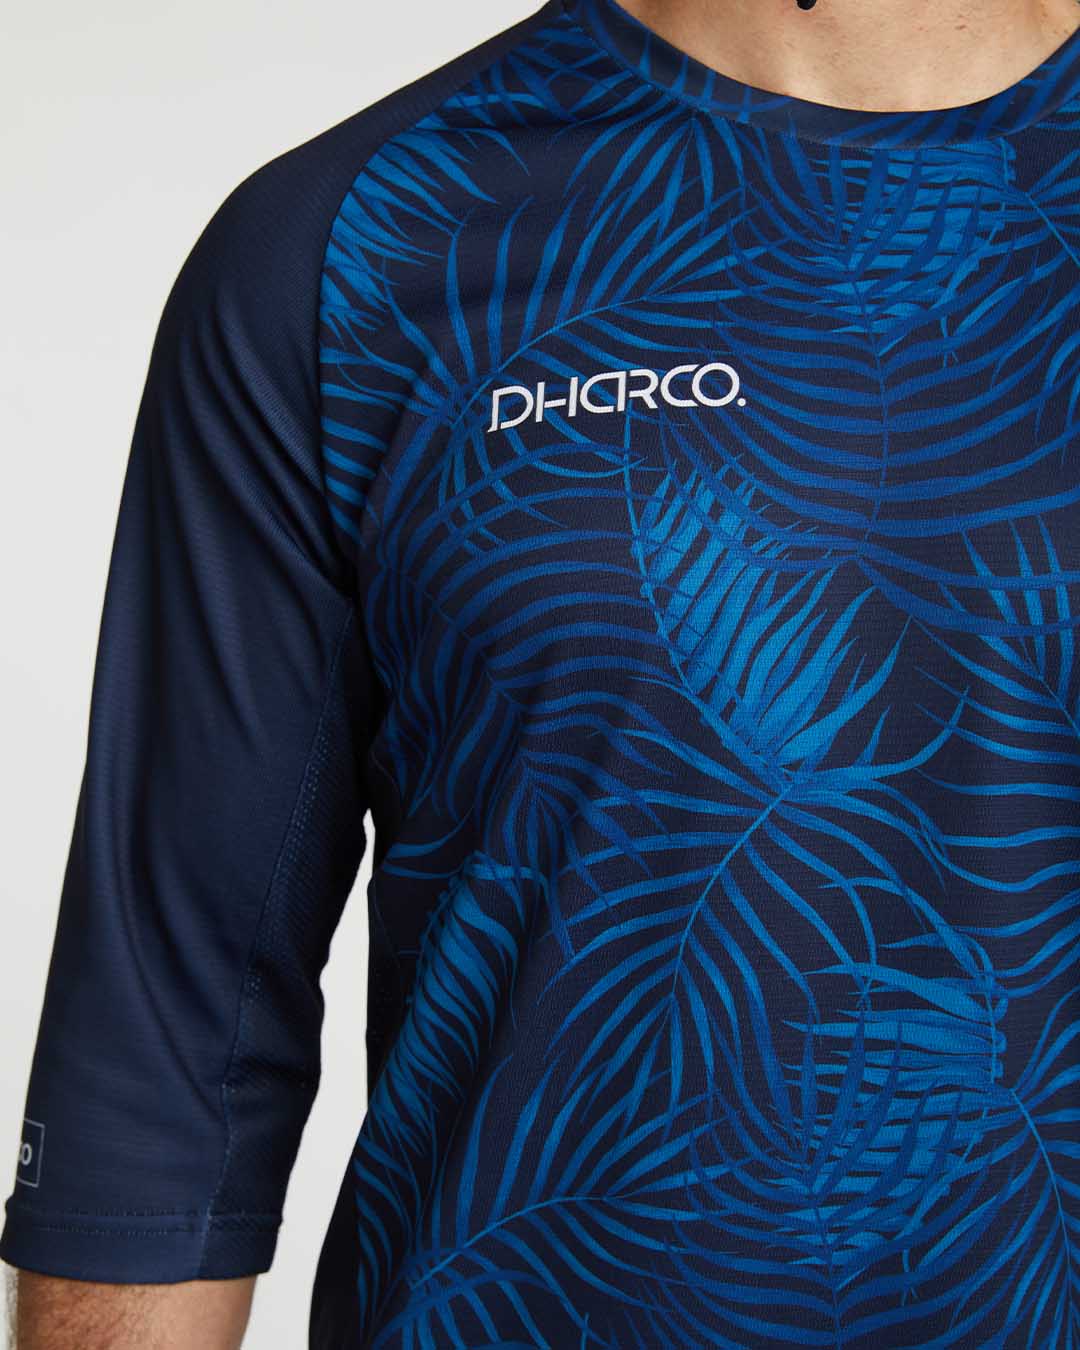 Mens Gravity Jersey  Forbidden - DHaRCO Clothing